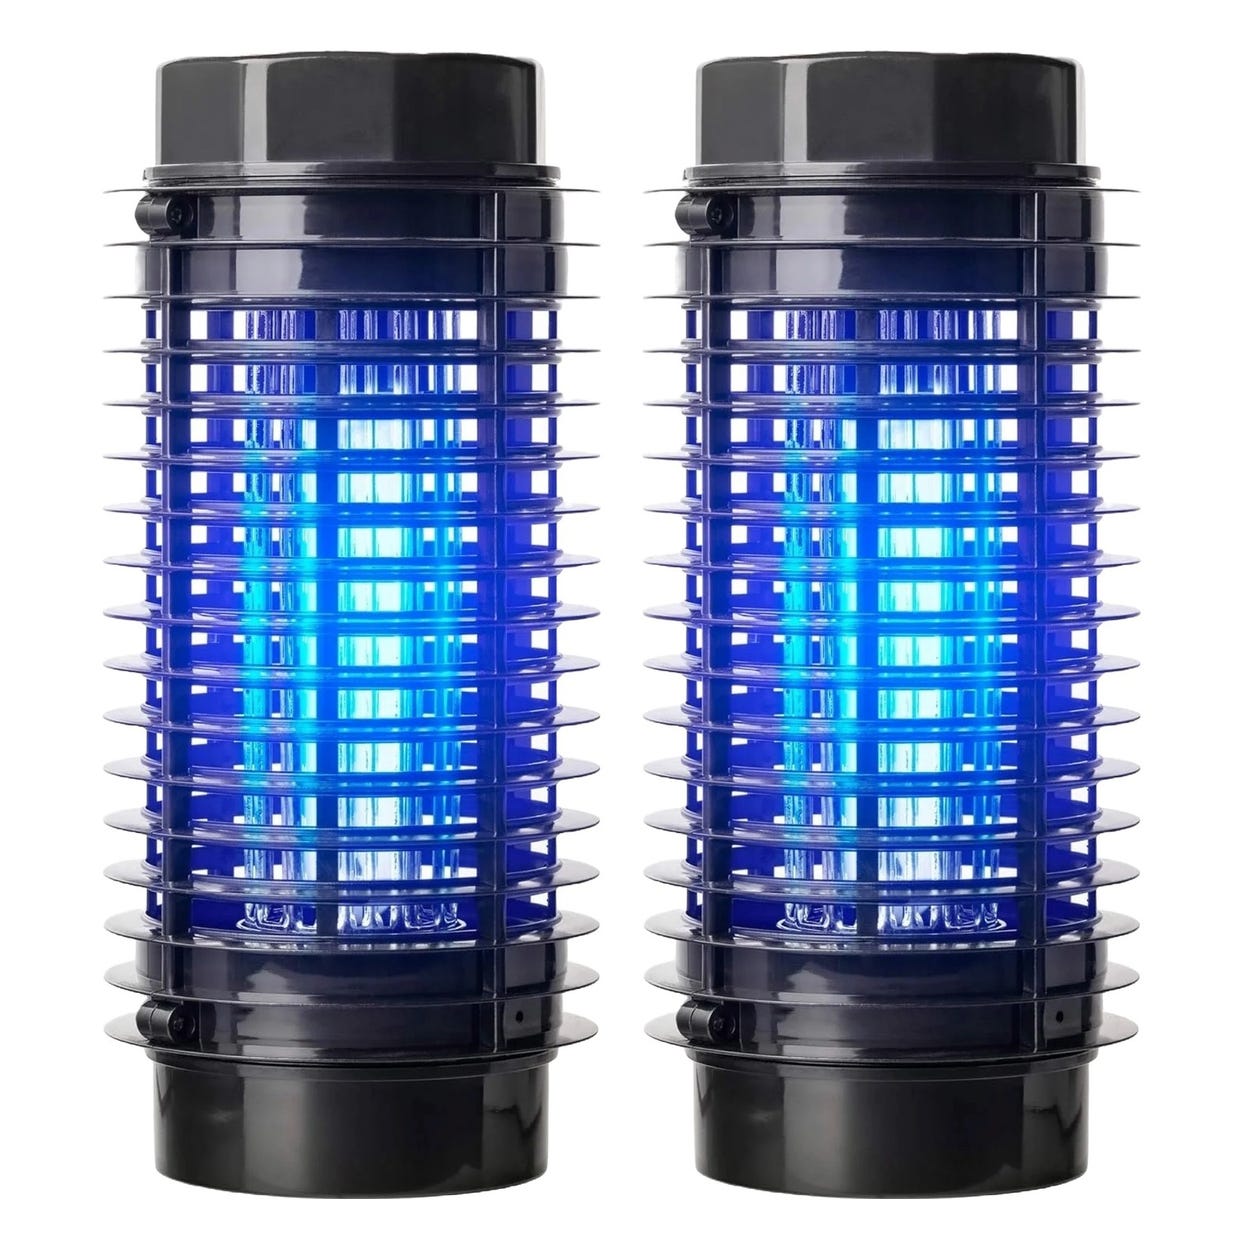 Two identical black electric insect zappers with blue light.